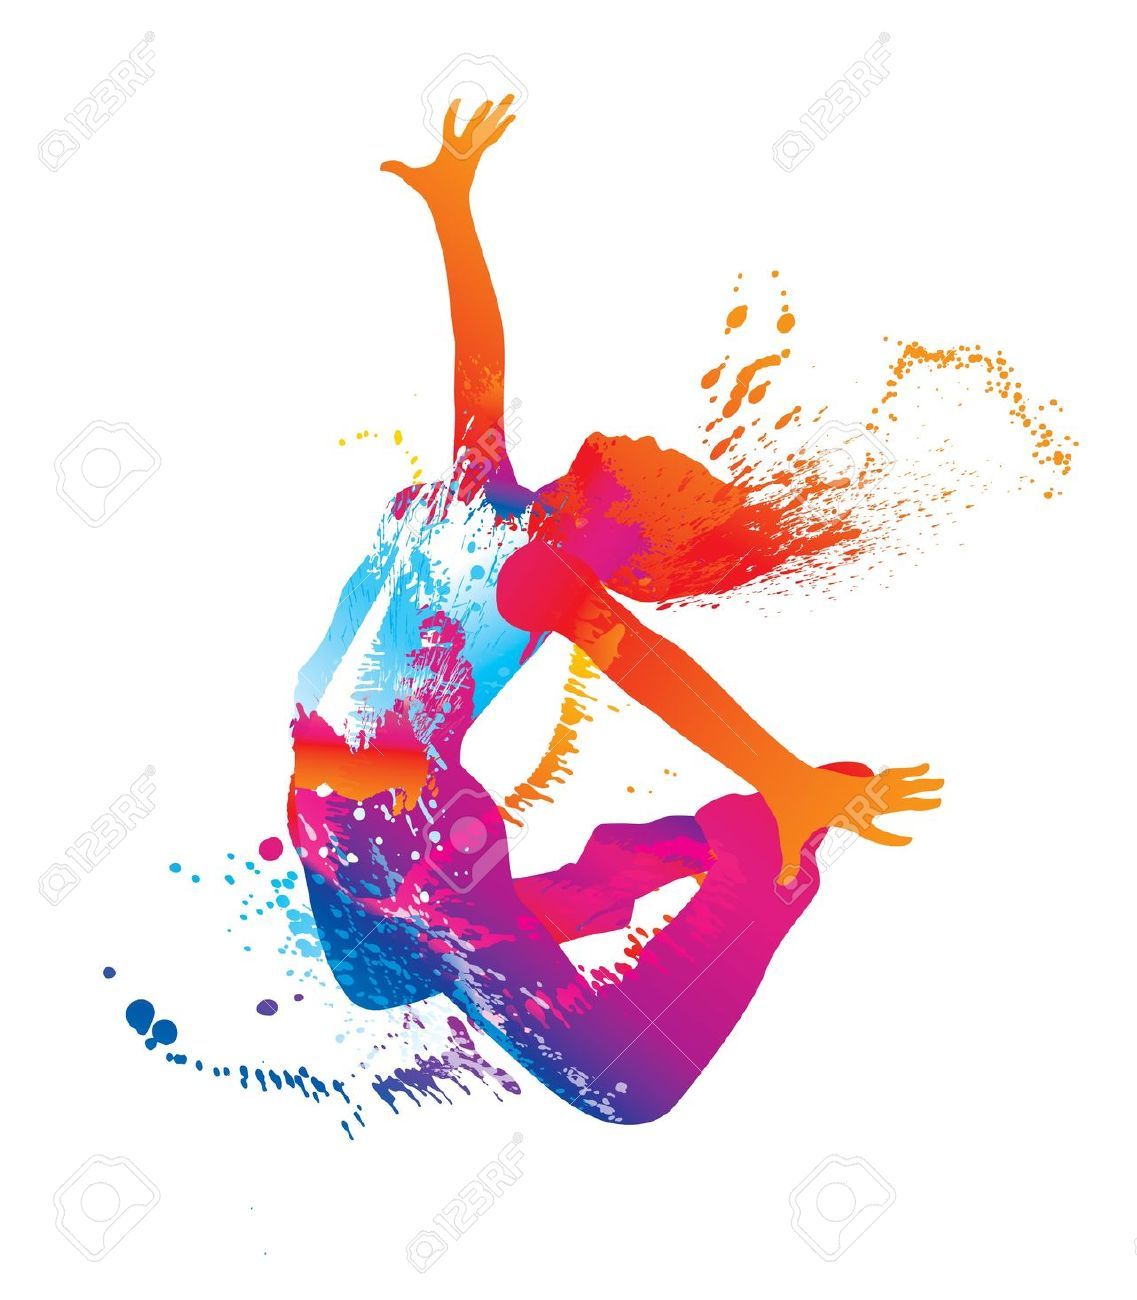 Jump The Dancing Girl With Colorful Spots And Splashes On White